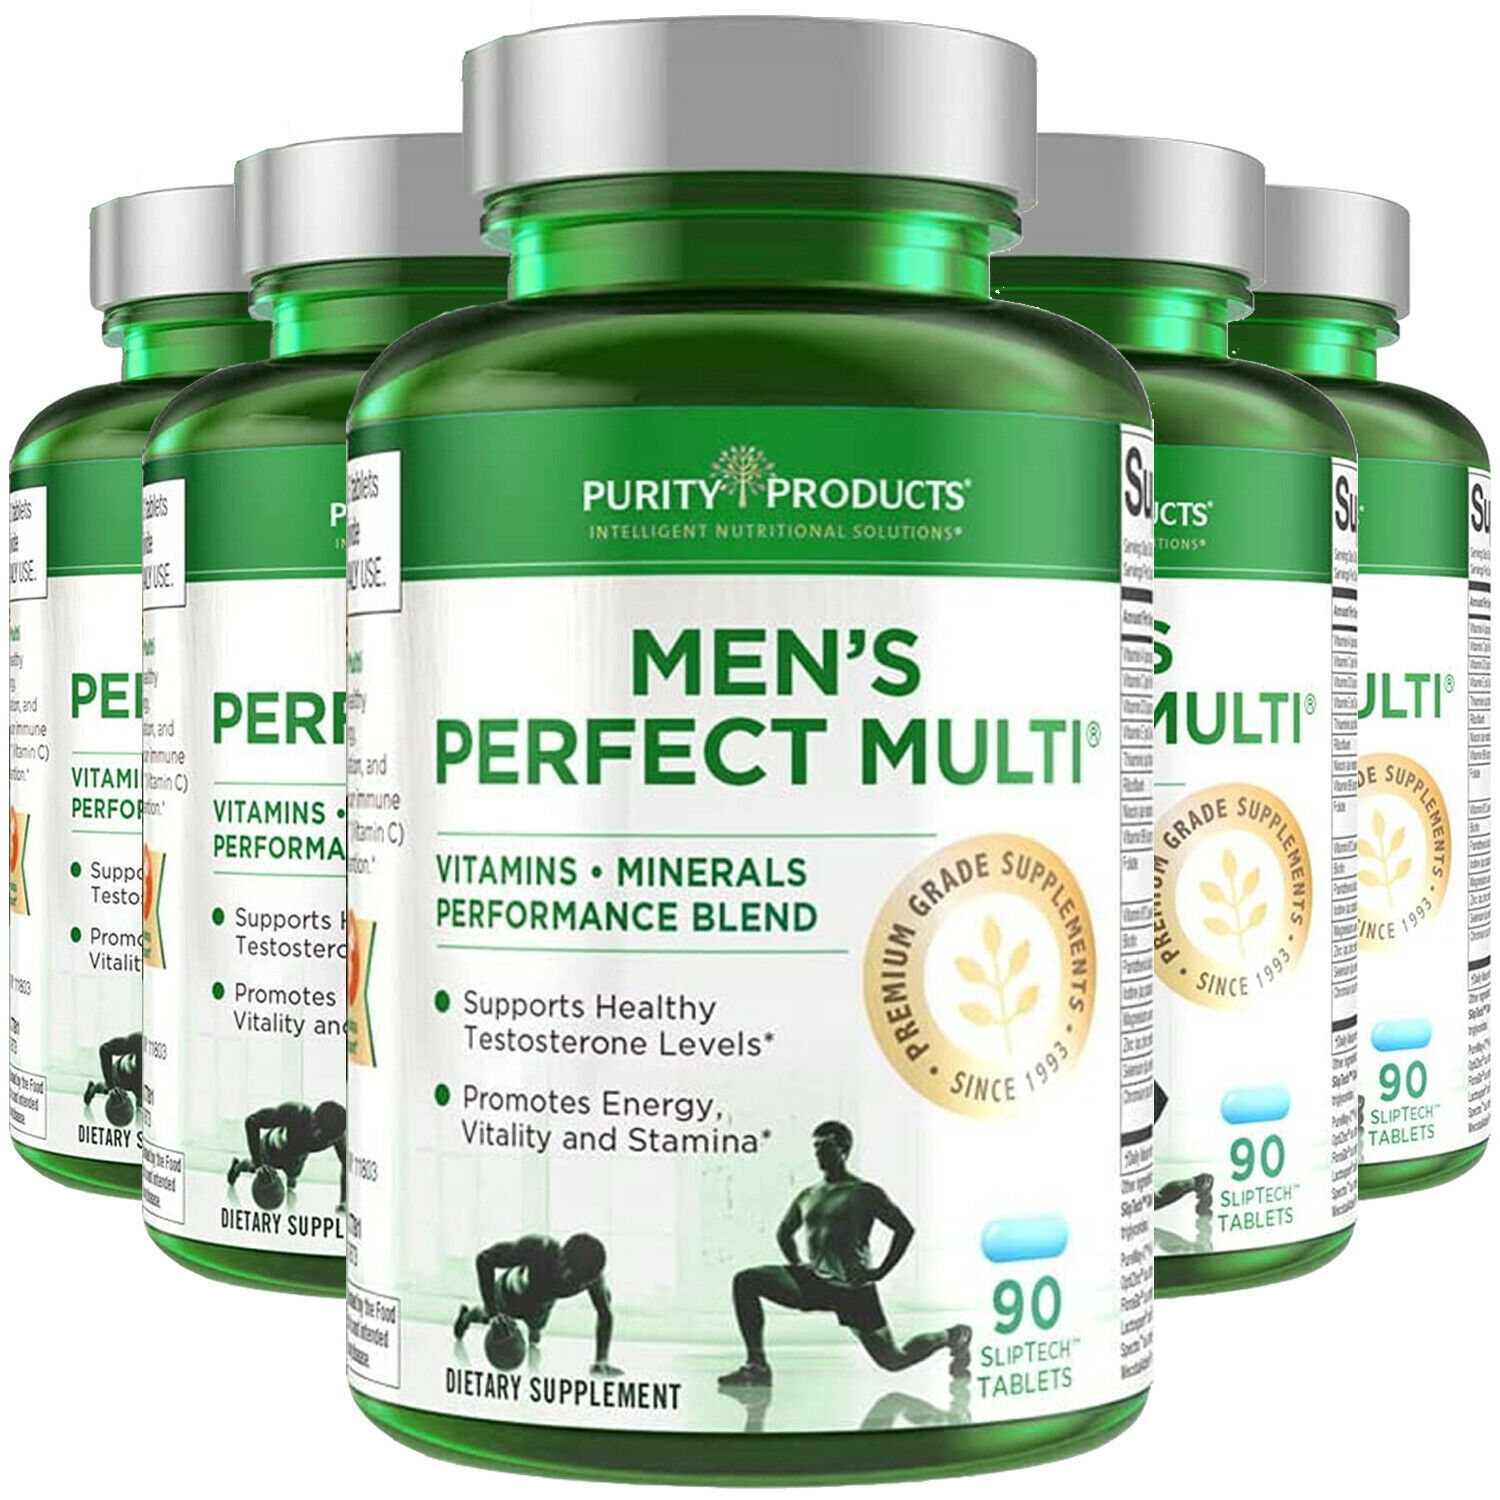 Men's Perfect Multi Purity Products VitaminsMineralsPhytonutrients 5X90Tabs